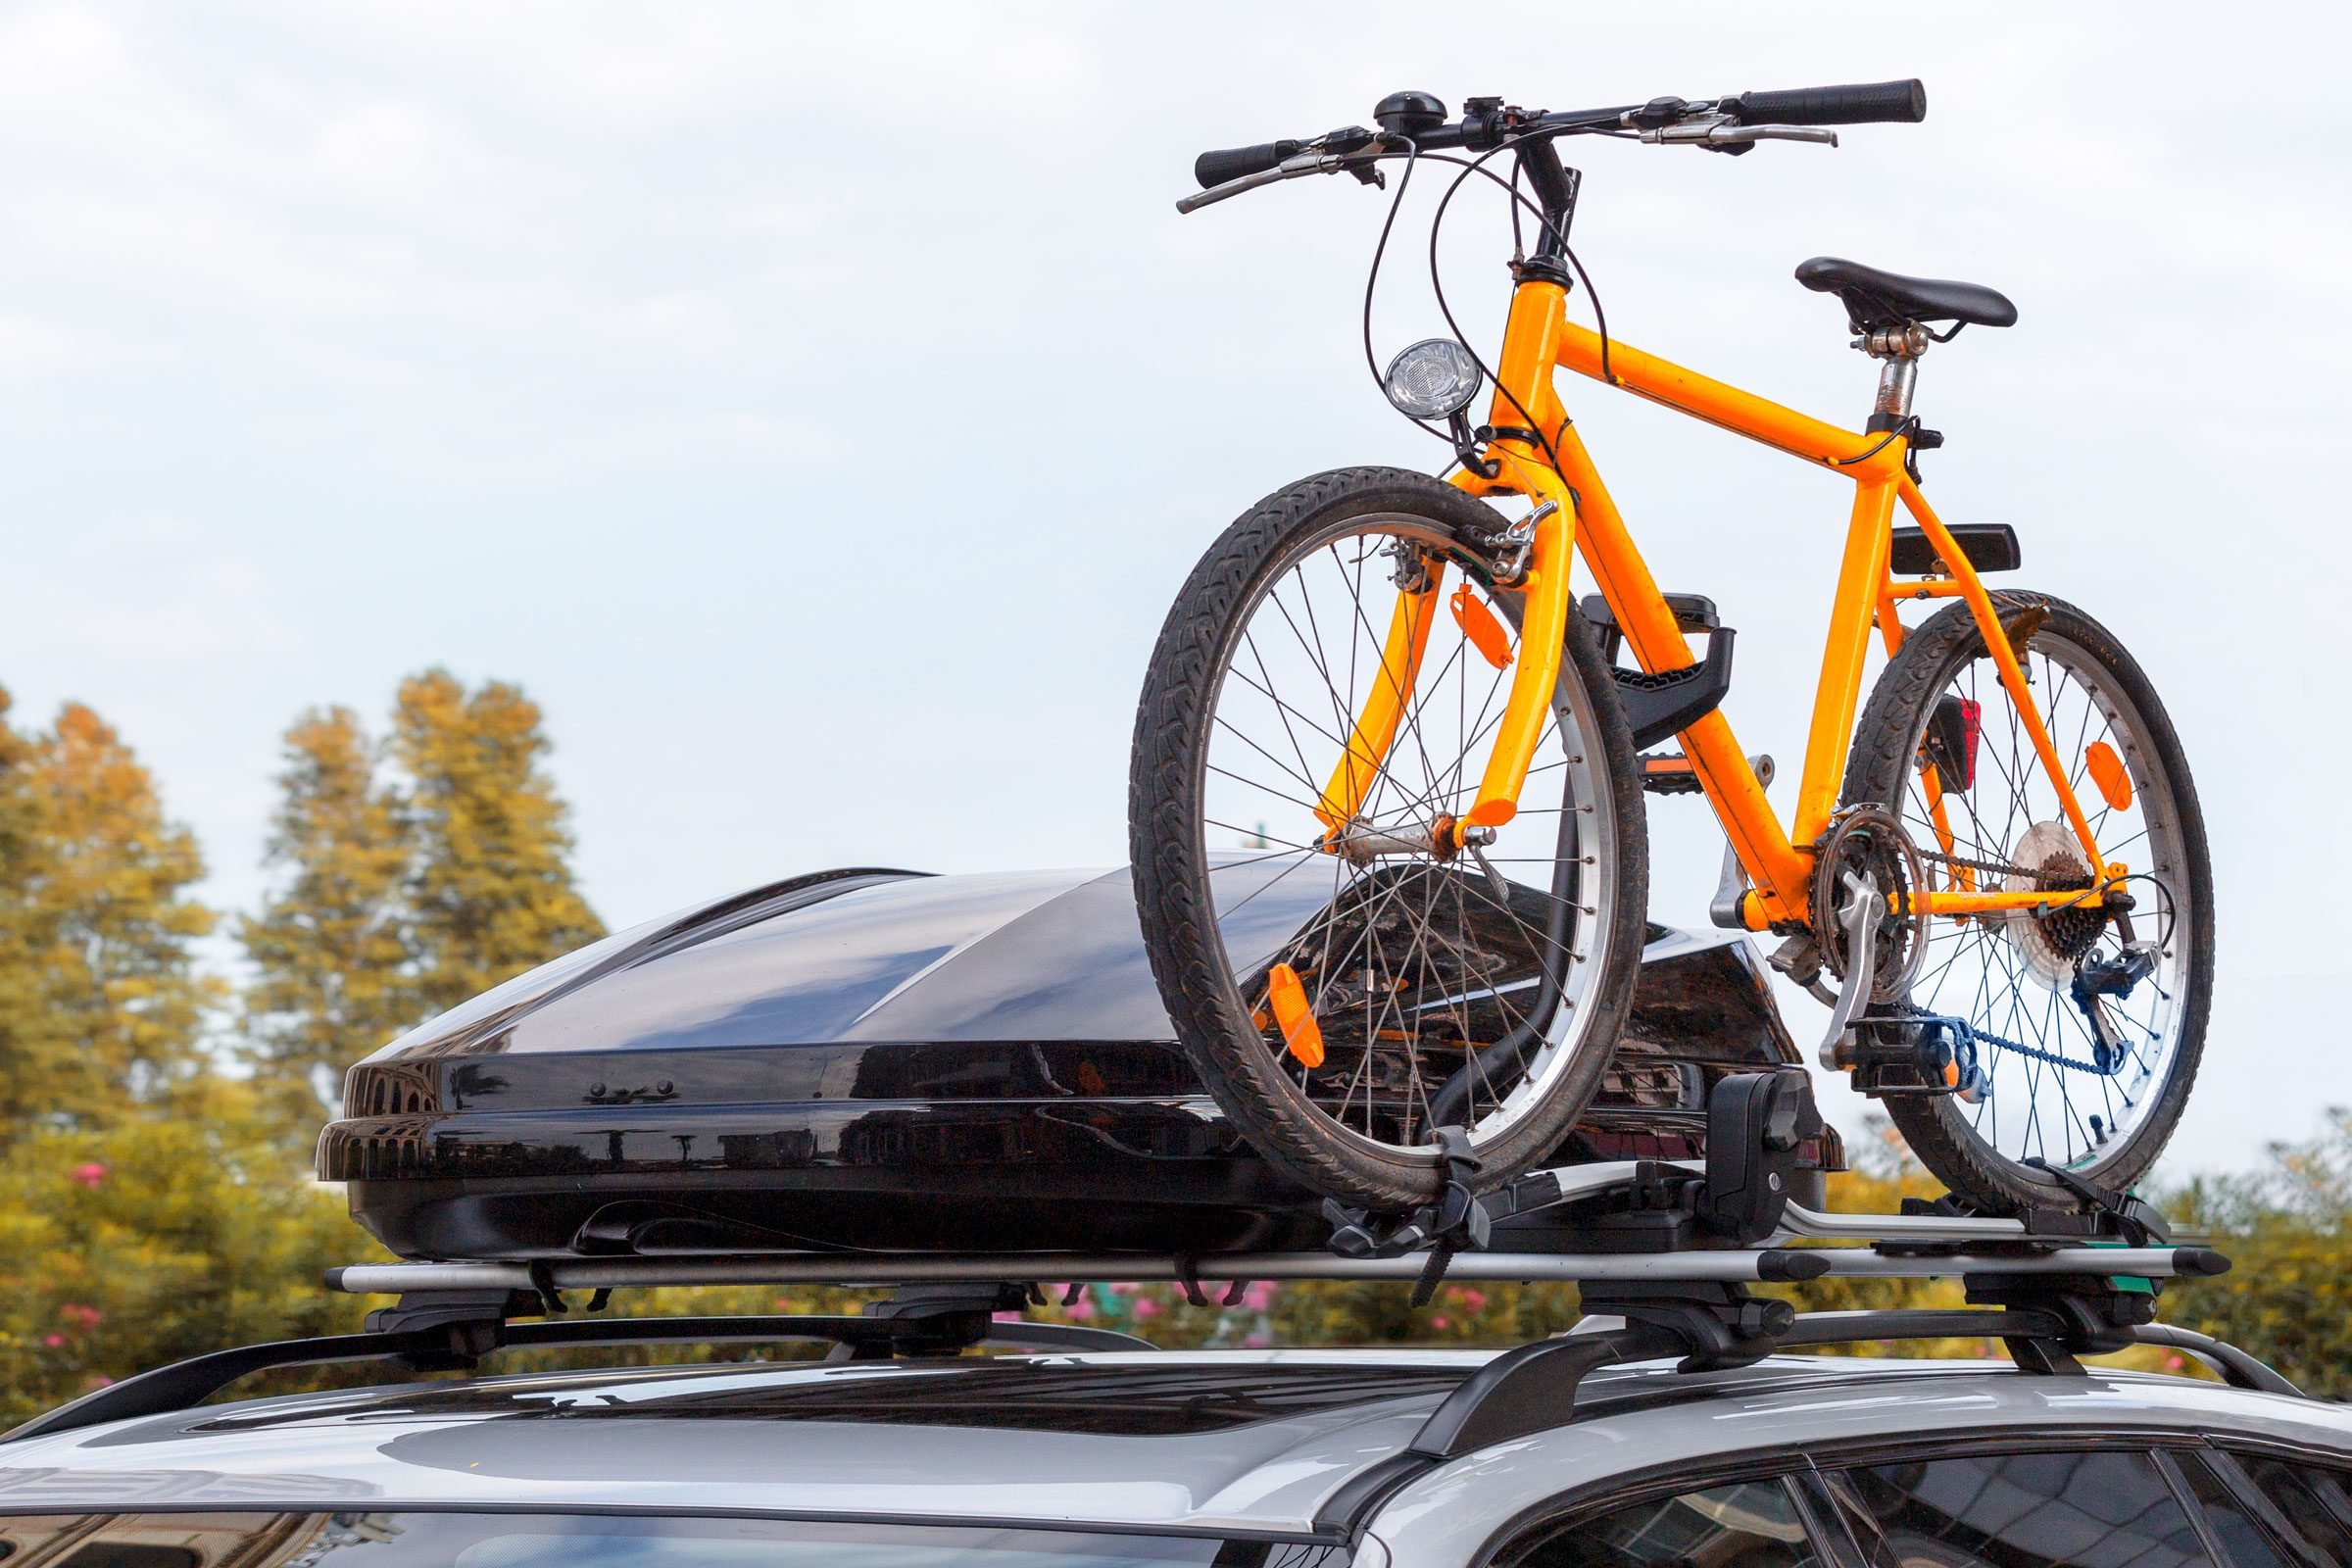 Gear on the Go: How to Attach a Cargo Carrier to a Roof Rack